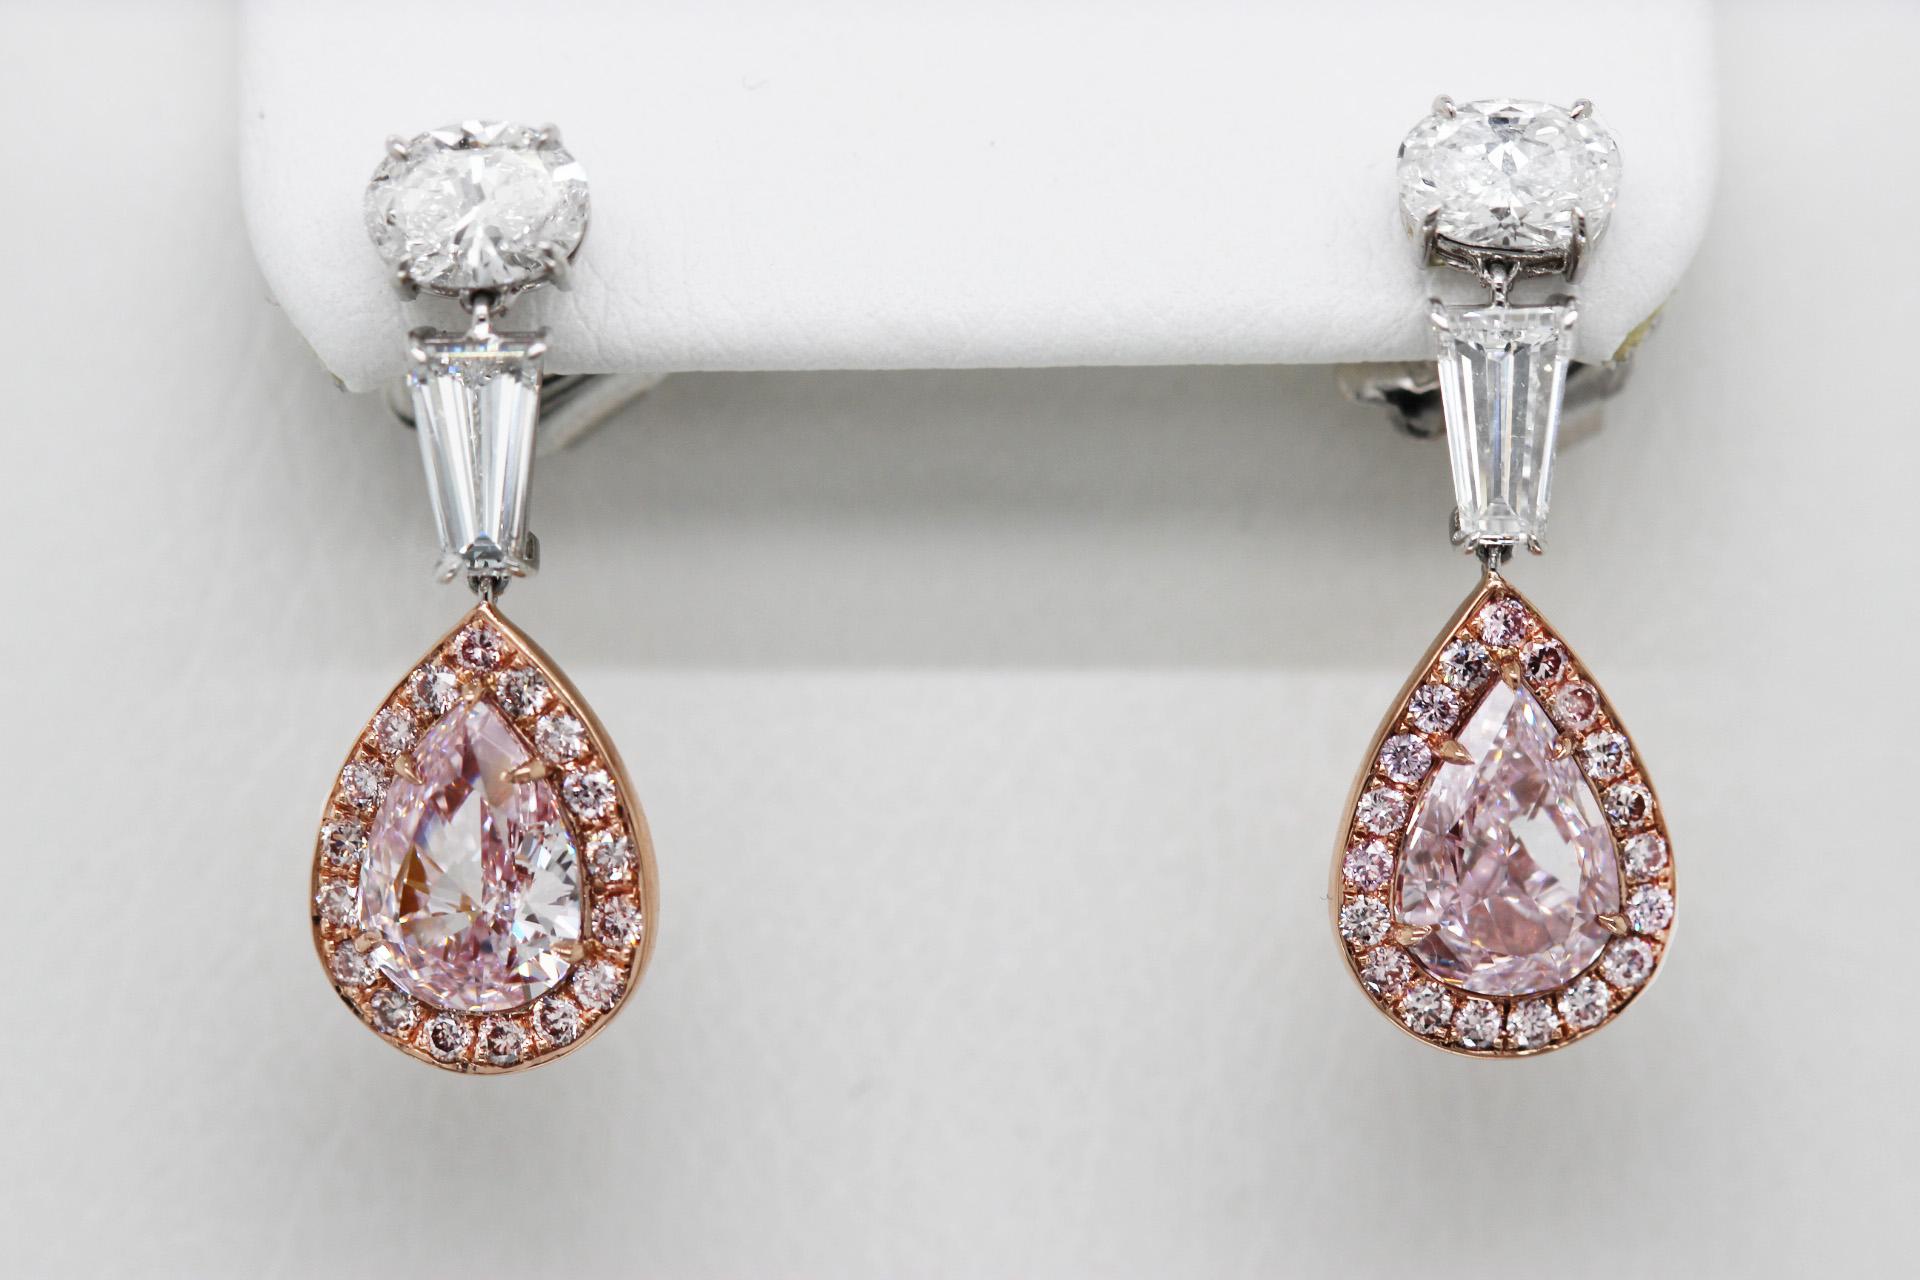 A pair of natural pink diamond dangle earrings from Scarselli, with a total carat weight of 5.48. Set on 18k rose gold and platinum, the pair features two exceptional GIA-certified fancy pink diamond center stones.

The upper portion of the earrings